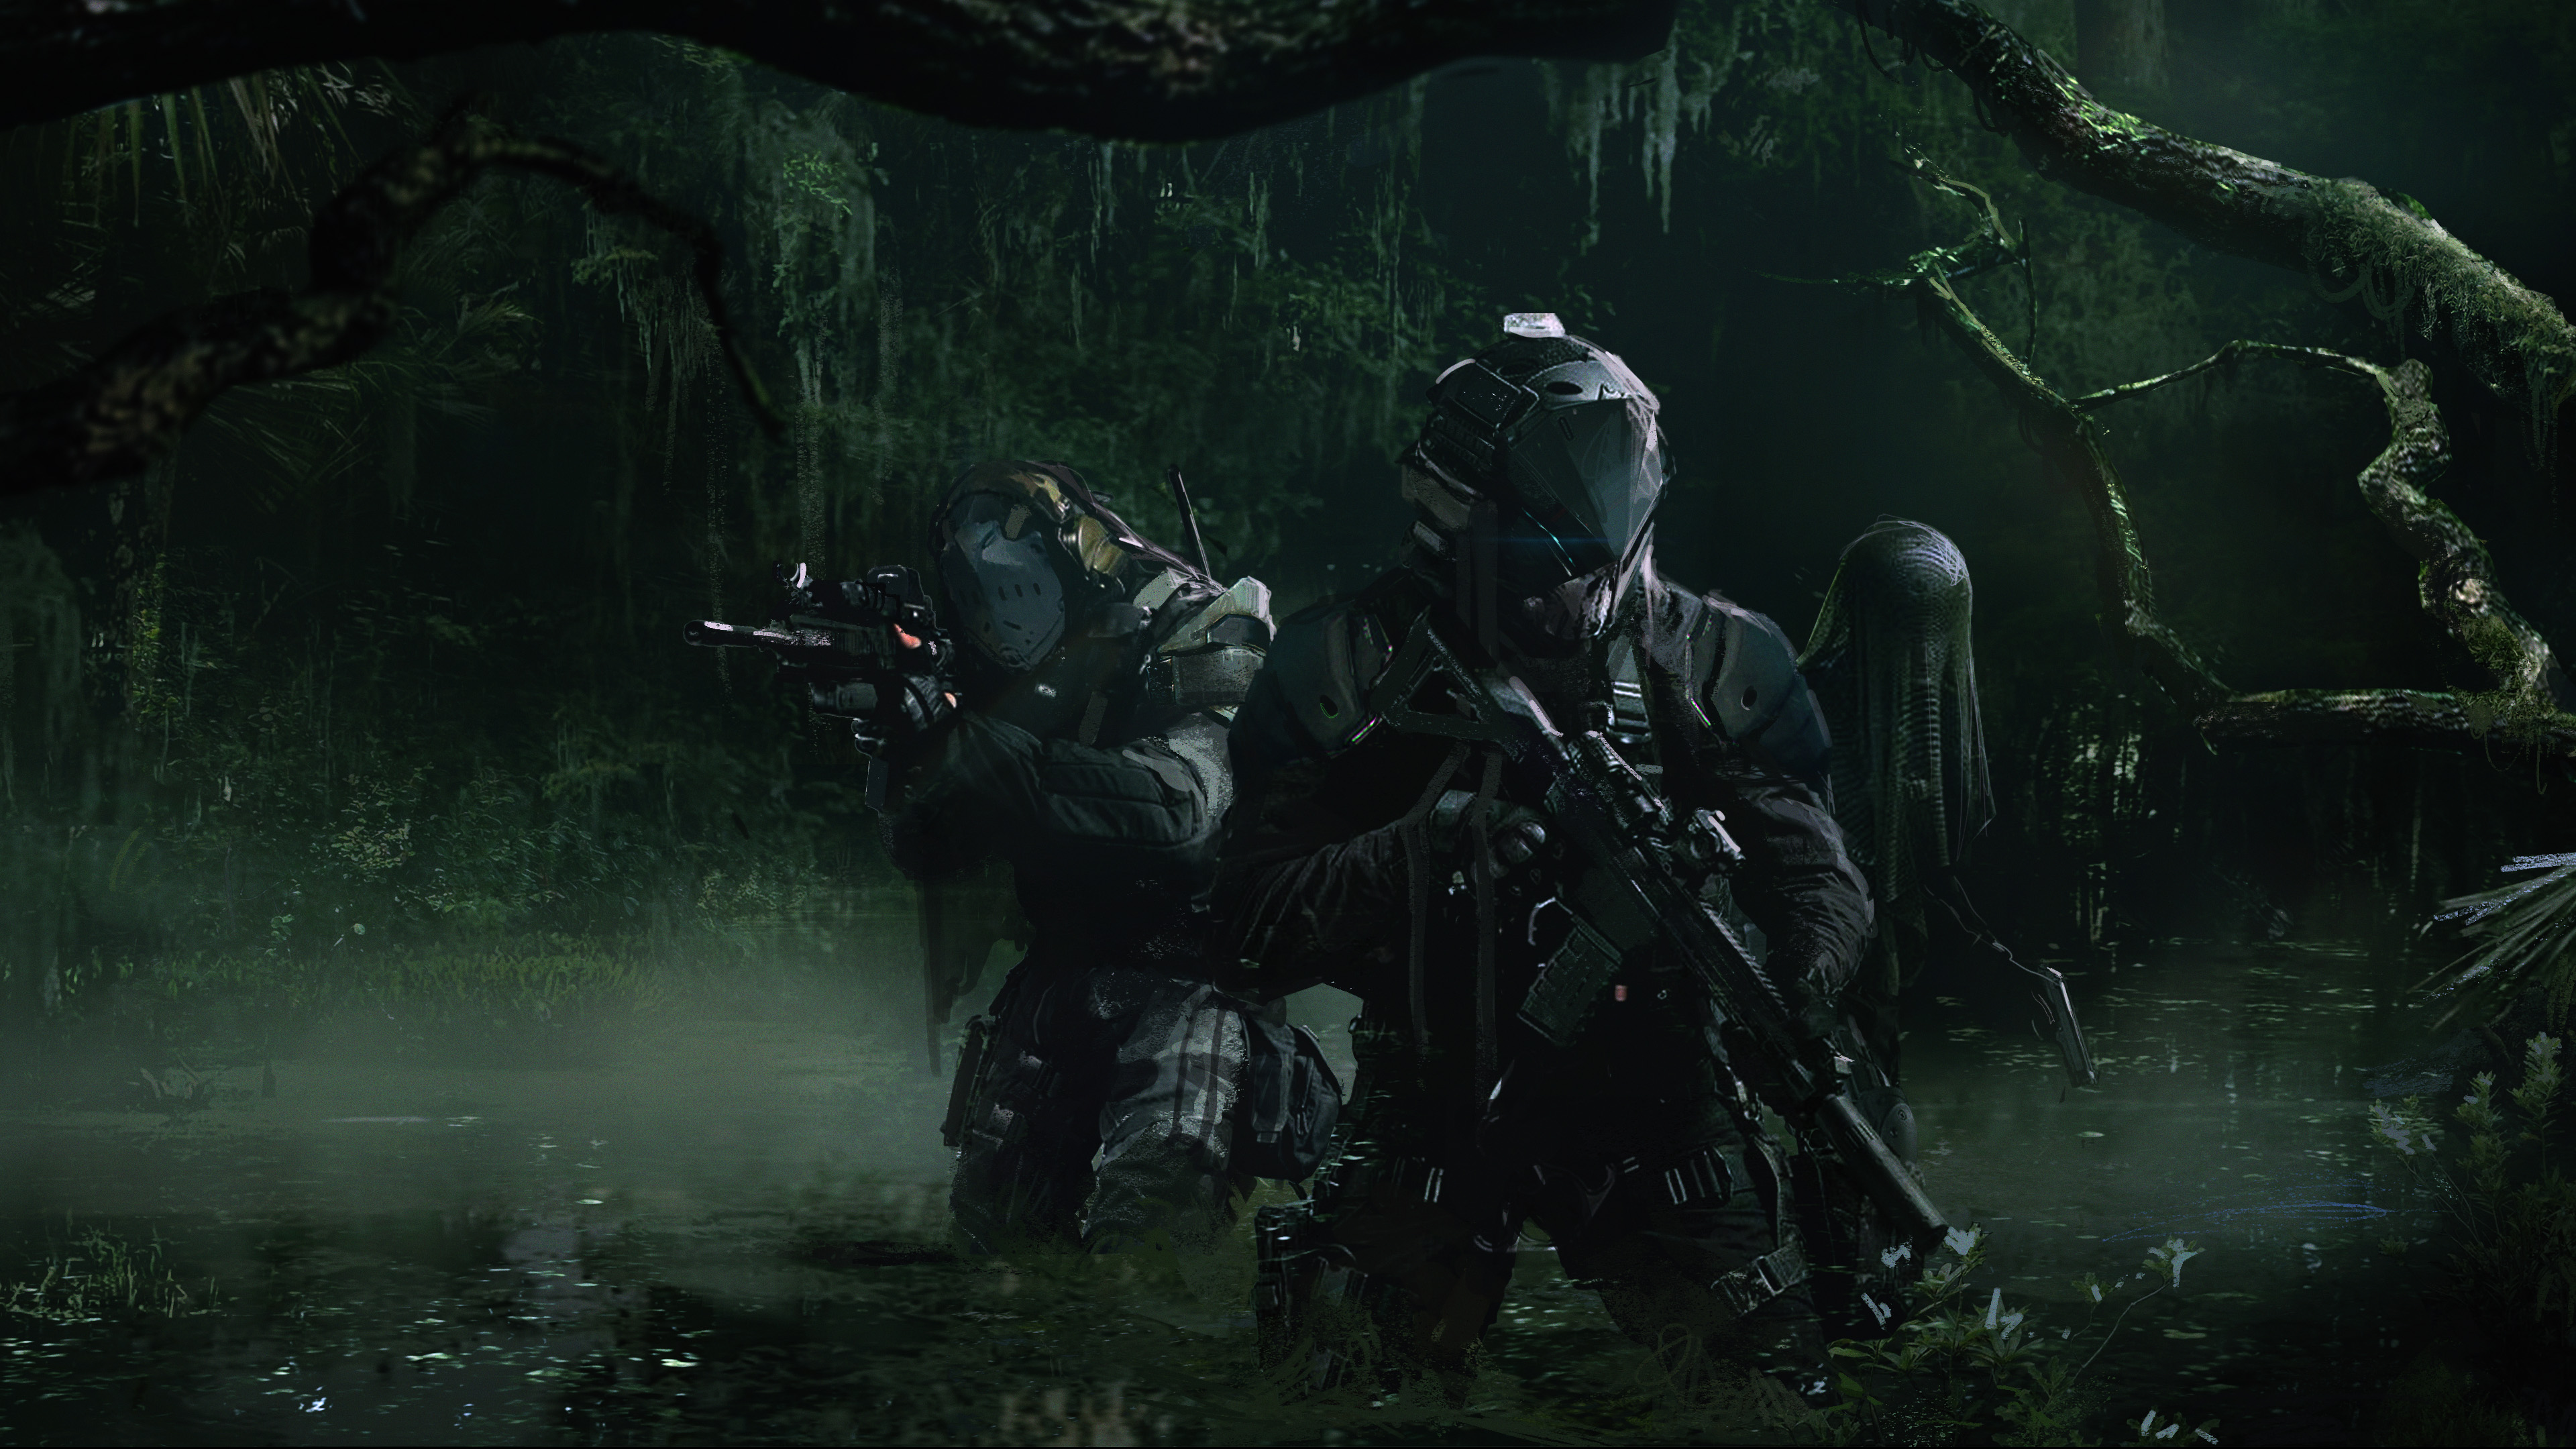 Tom Clancys Ghost Recon Breakpoint Armored Swamp Tactical Shrubbery 3840x2160